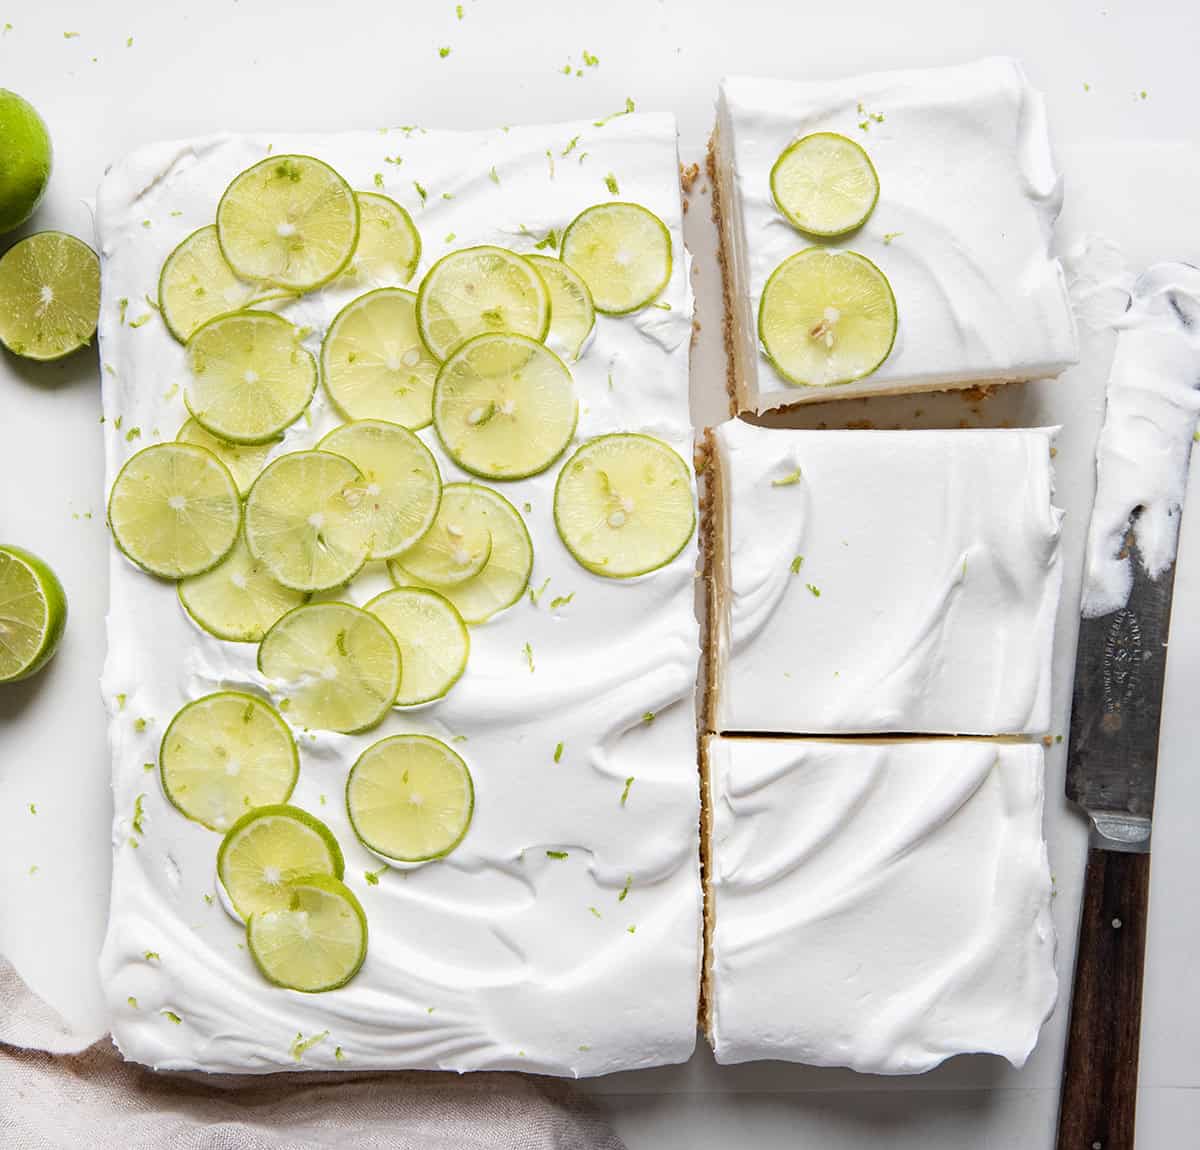 Key Lime Pie Bars on a white table with some bars cut from overhead.